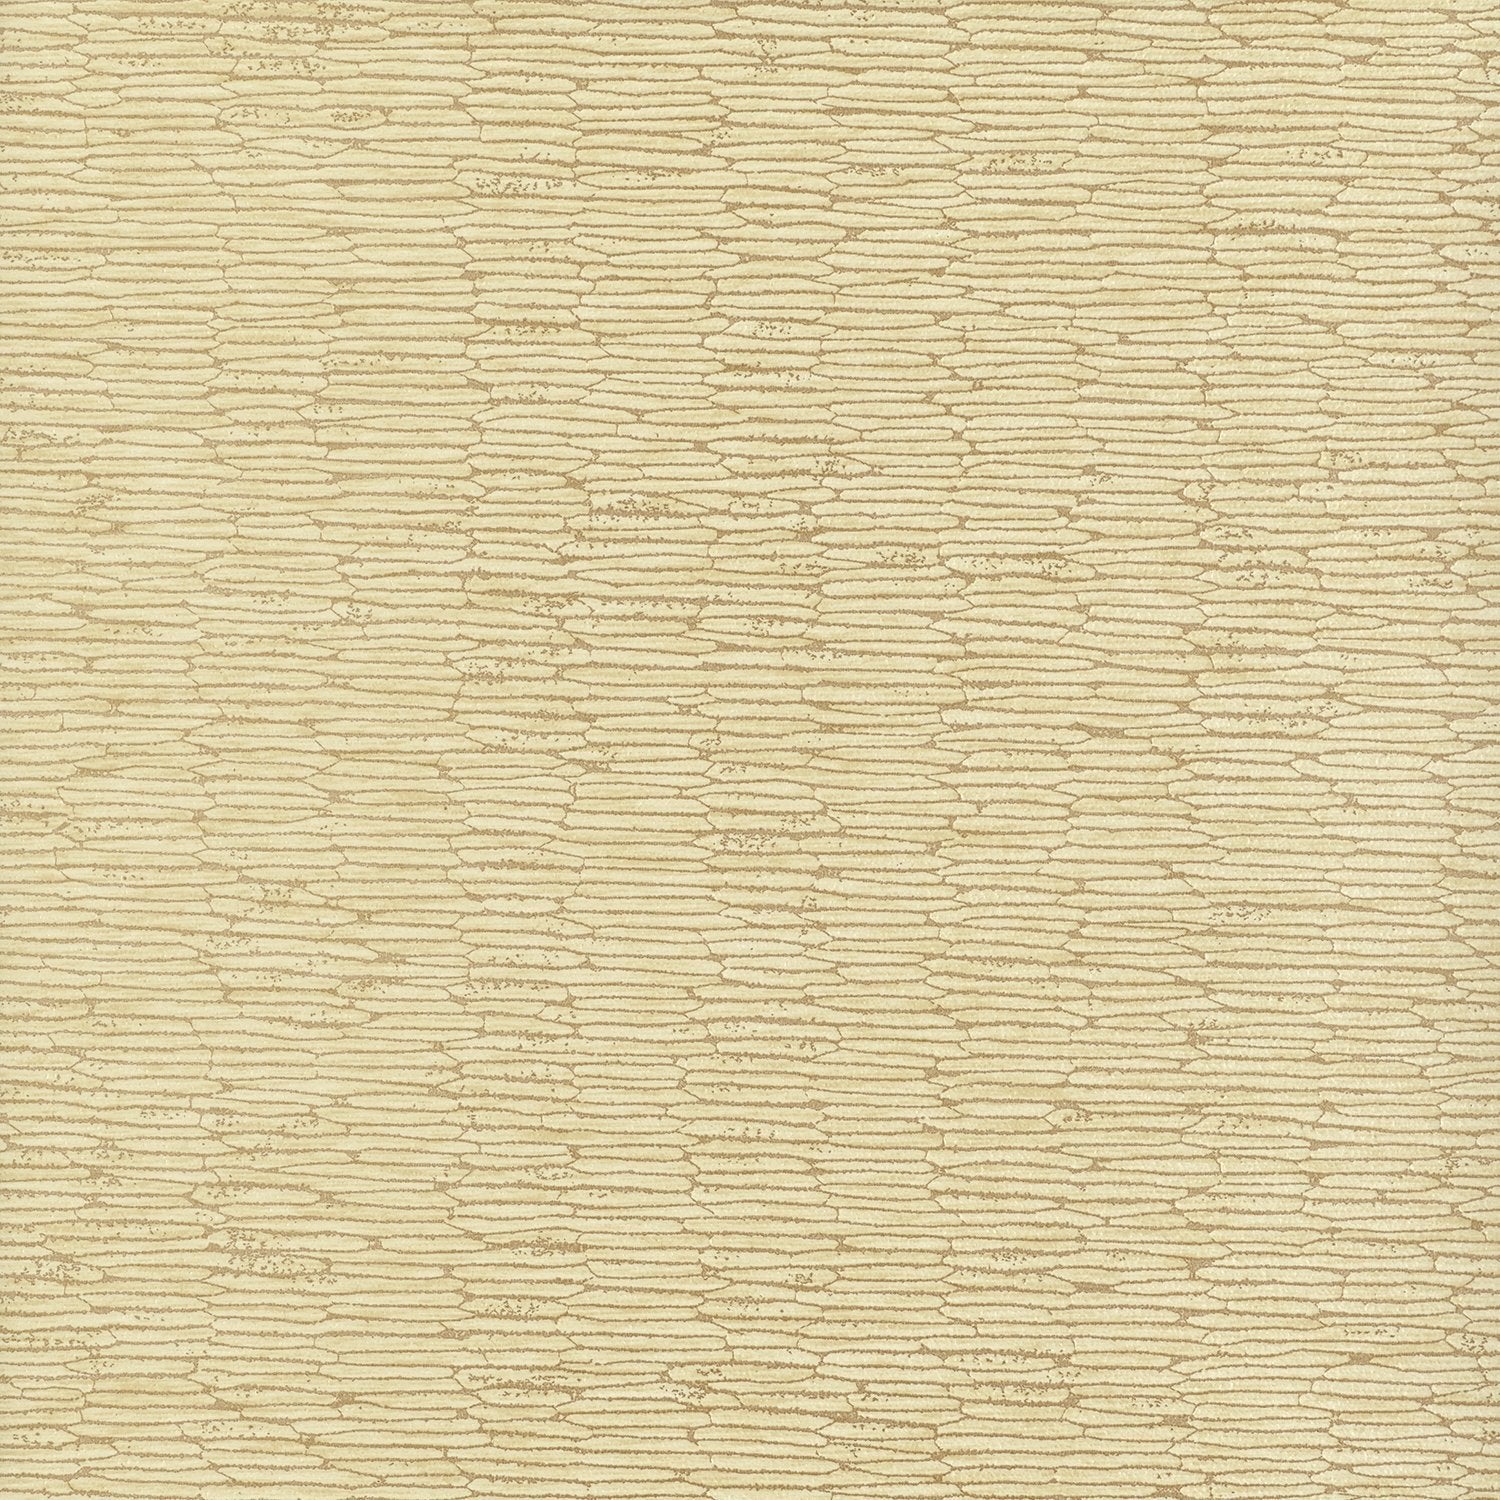 Chipper - Y46854 - Wallcovering - Vycon - Kube Contract